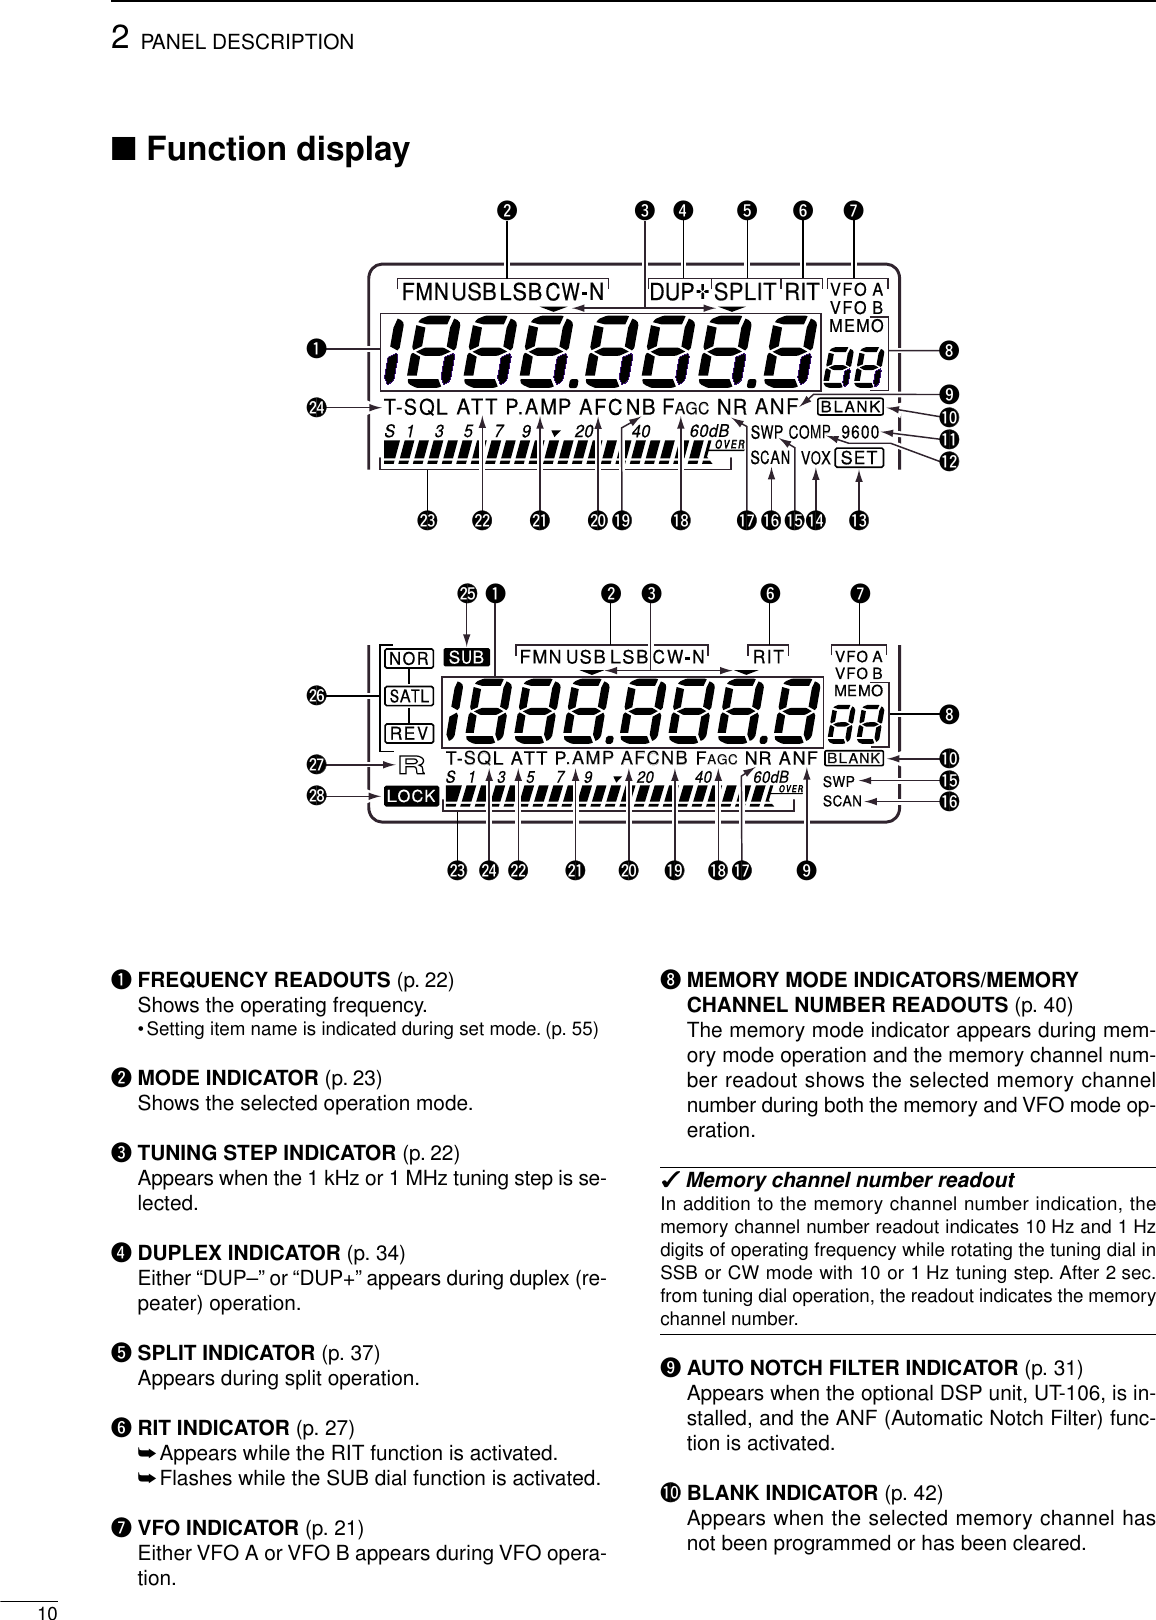 102PANEL DESCRIPTIONqFREQUENCY READOUTS (p. 22)Shows the operating frequency.•Setting item name is indicated during set mode. (p. 55)wMODE INDICATOR (p. 23)Shows the selected operation mode.eTUNING STEP INDICATOR (p. 22)Appears when the 1 kHz or 1 MHz tuning step is se-lected.rDUPLEX INDICATOR (p. 34)Either “DUP–” or “DUP+”appears during duplex (re-peater) operation.tSPLIT INDICATOR (p. 37)Appears during split operation.yRIT INDICATOR (p. 27)➥Appears while the RIT function is activated.➥Flashes while the SUB dial function is activated.uVFO INDICATOR (p. 21)Either VFO A or VFO B appears during VFO opera-tion.iMEMORY MODE INDICATORS/MEMORYCHANNEL NUMBER READOUTS (p. 40)The memory mode indicator appears during mem-ory mode operation and the memory channel num-ber readout shows the selected memory channelnumber during both the memory and VFO mode op-eration.✔Memory channel number readoutIn addition to the memory channel number indication, thememory channel number readout indicates 10 Hz and 1 Hzdigits of operating frequency while rotating the tuning dial inSSB or CW mode with 10 or 1 Hz tuning step. After 2 sec.from tuning dial operation, the readout indicates the memorychannel number.oAUTO NOTCH FILTER INDICATOR (p. 31)Appears when the optional DSP unit, UT-106, is in-stalled, and the ANF (Automatic Notch Filter) func-tion is activated.!0 BLANK INDICATOR (p. 42)Appears when the selected memory channel hasnot been programmed or has been cleared.VFOAVFOBMEMORITCW NLSBUSBNFMSUBNORSATLREVLOCKT-SQSQLS1357920 40 60dBATT P.AMP.AMP AFCAFCNBNB FAGCAGC NR ANFBLBLANKNKSWPSCANOVEROVERMEMOFMNUSBUSBLSBCWNRITRITSPLITSPLIT VFO AVFO BSETBLANKT-SQLATT P.AMP AFCNBFAGCAGCNRANFANF9600COMPMPSWP60dBVOXSCANOVEROVERS13 5 7920 40DUPqqwweertyyuuiioo!0!0!1!2!3!4!5!5!6!6!7!7!8!8!9!9@0@0@1@1@2@2@3@3@5@6@7@8@4@4■Function display